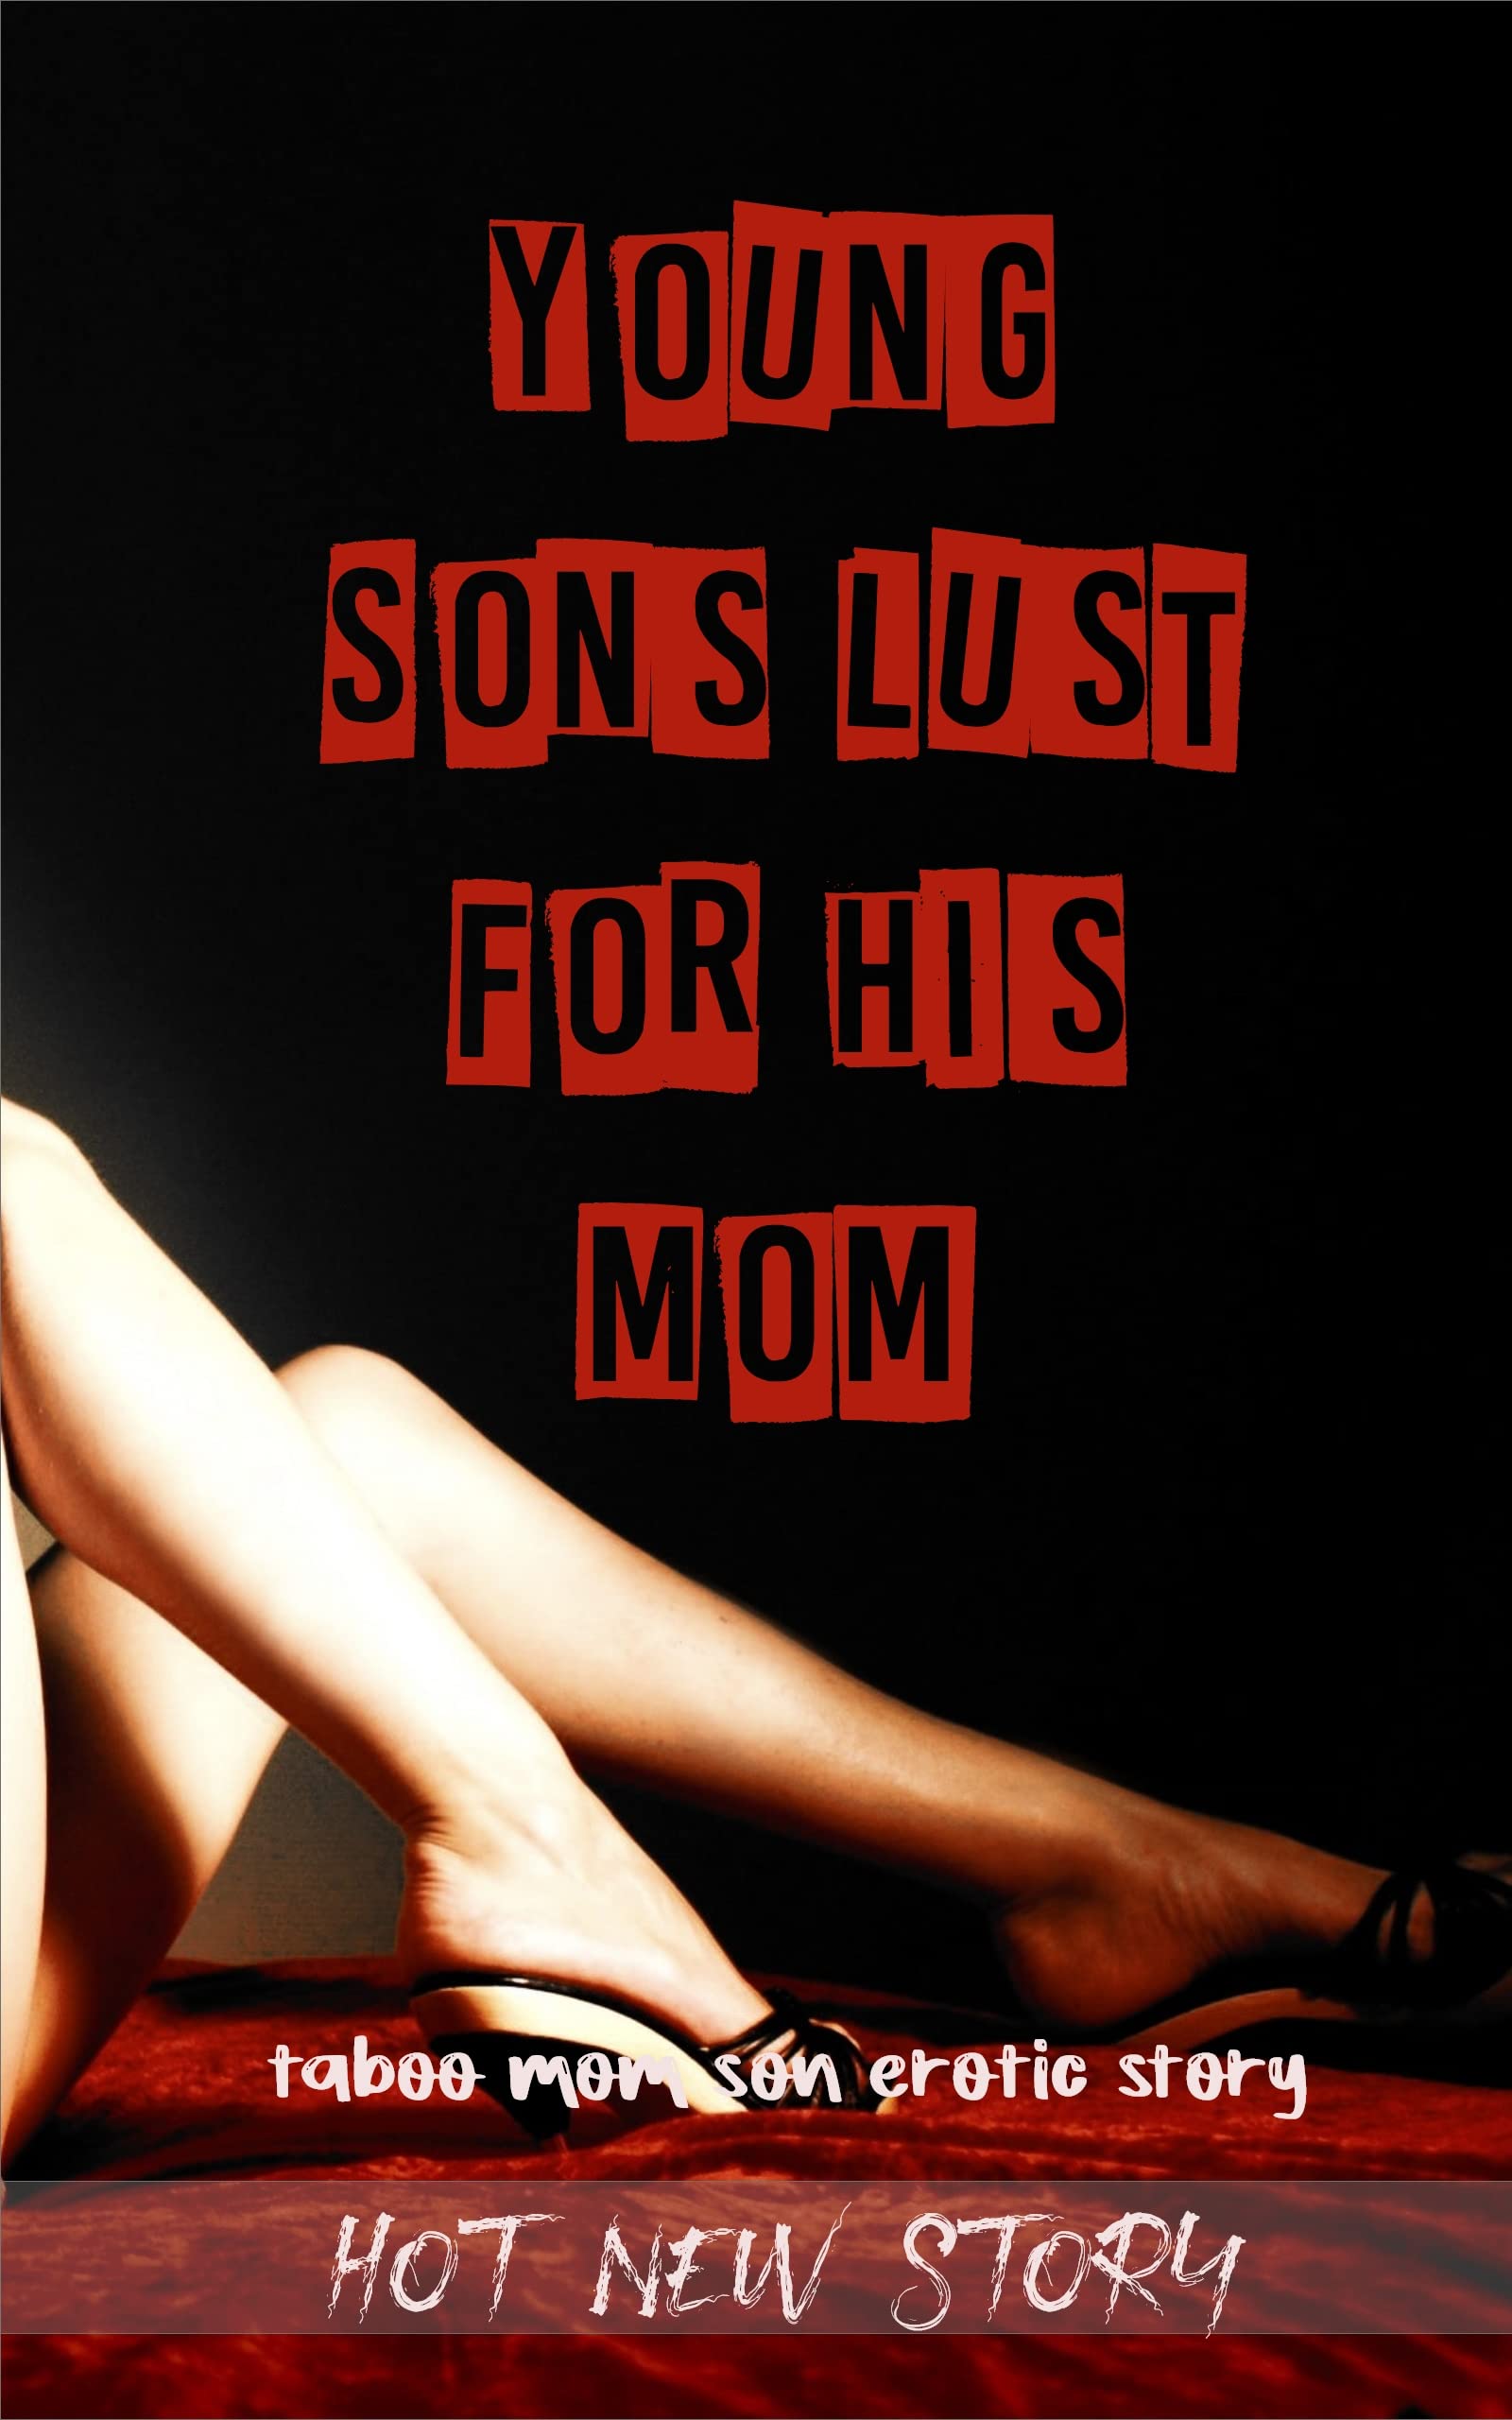 ashley gutierez recommends mommy and son stories pic